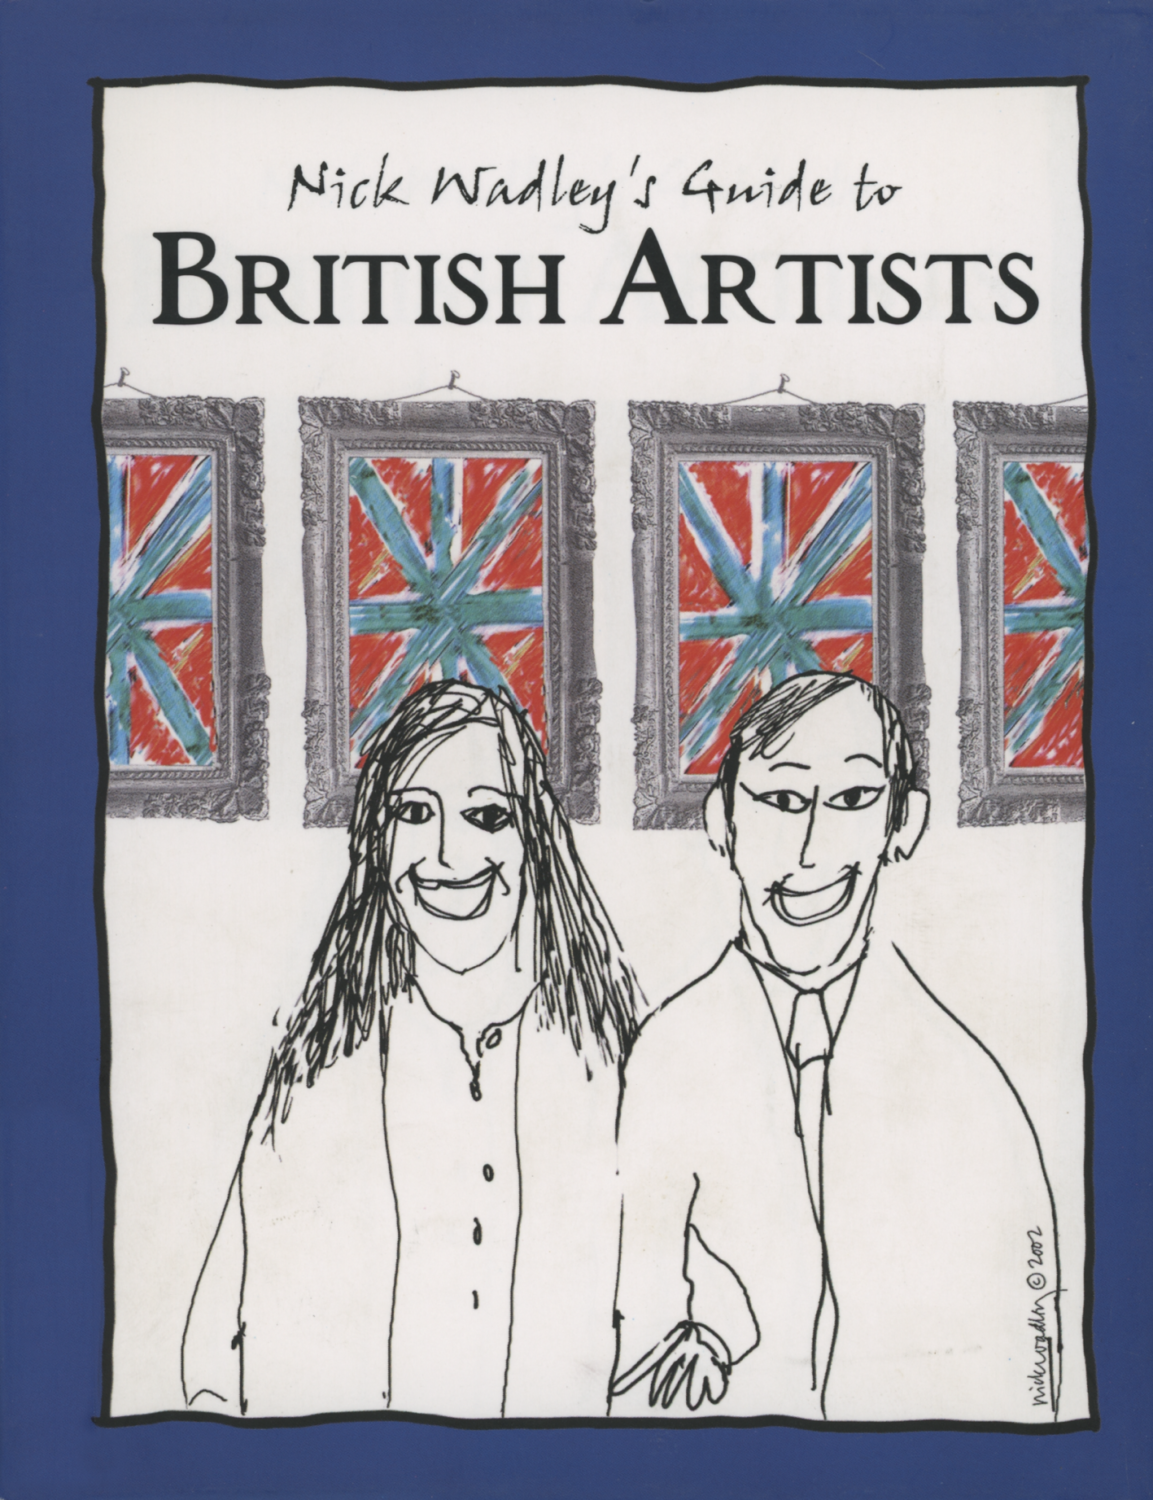 Nick Wadley’s Guide to British Artists